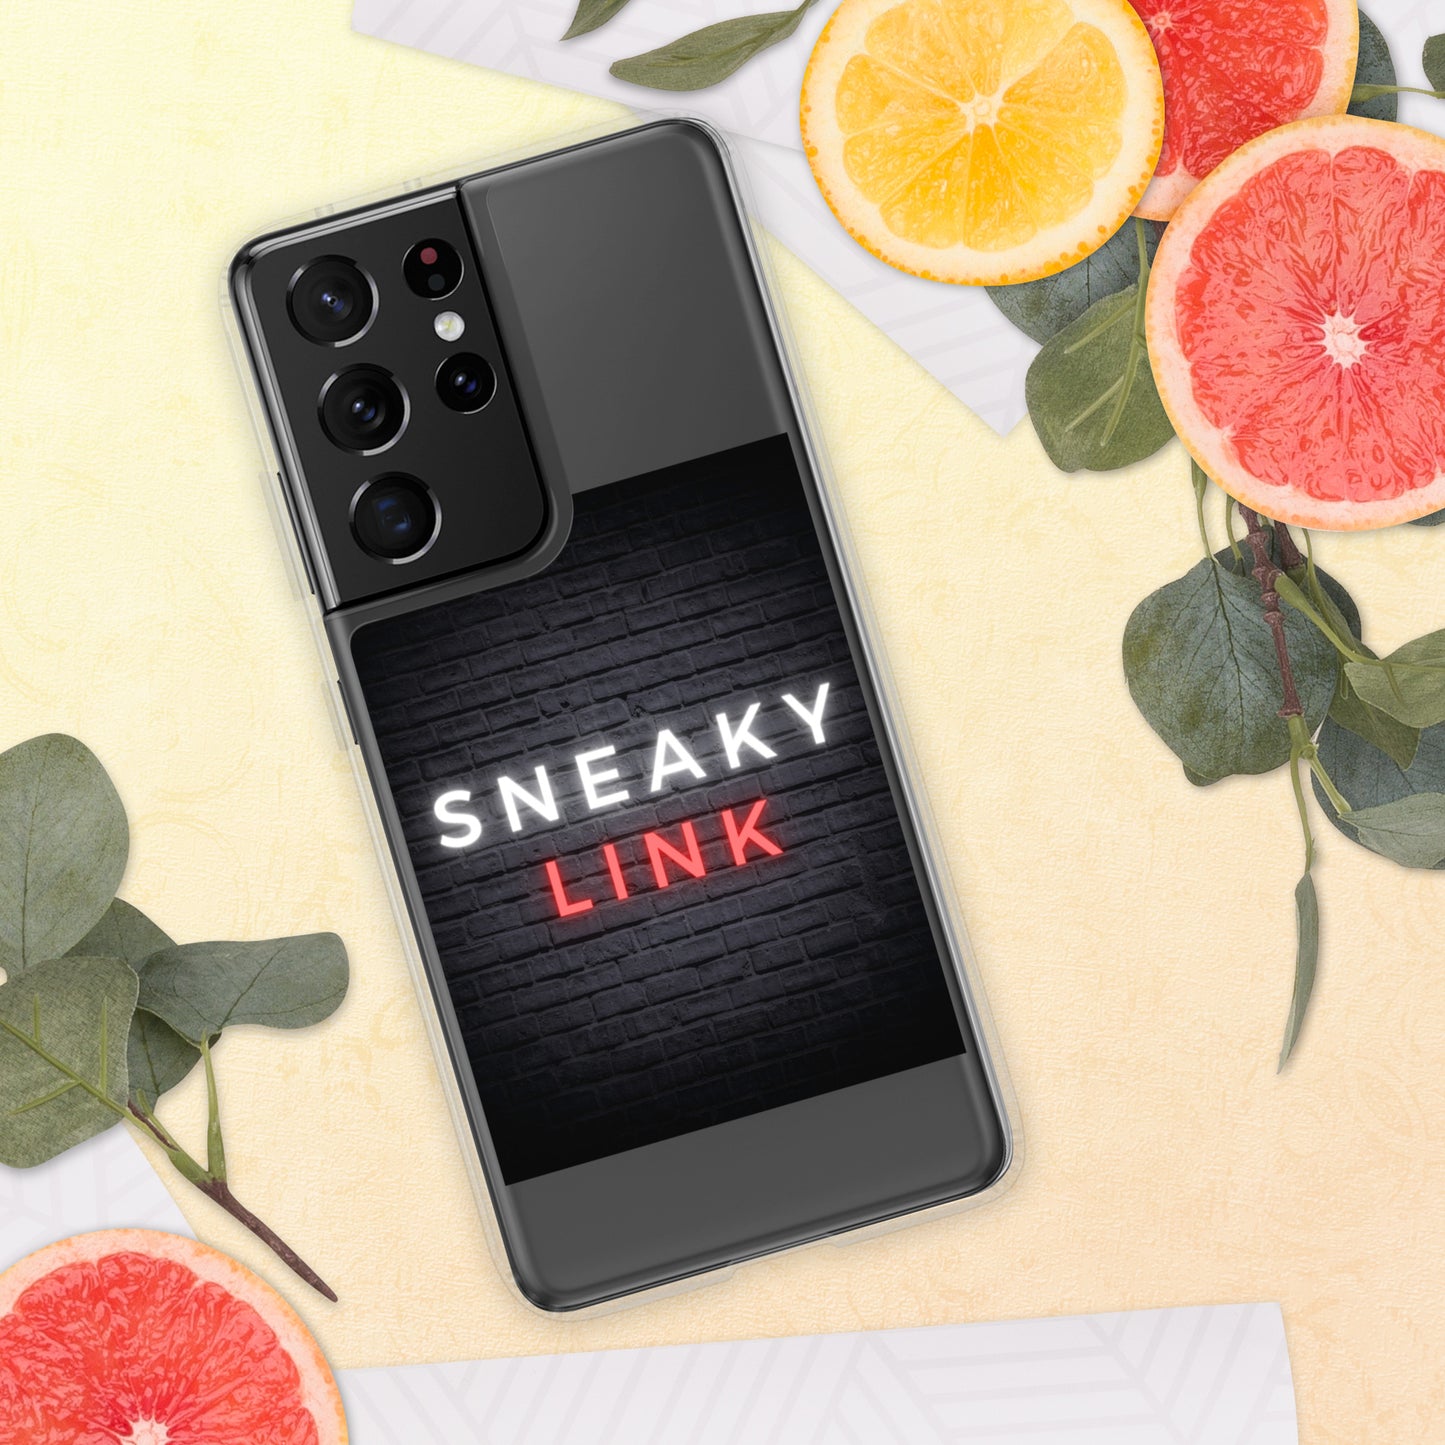 SNEAKY LINK Samsung Case